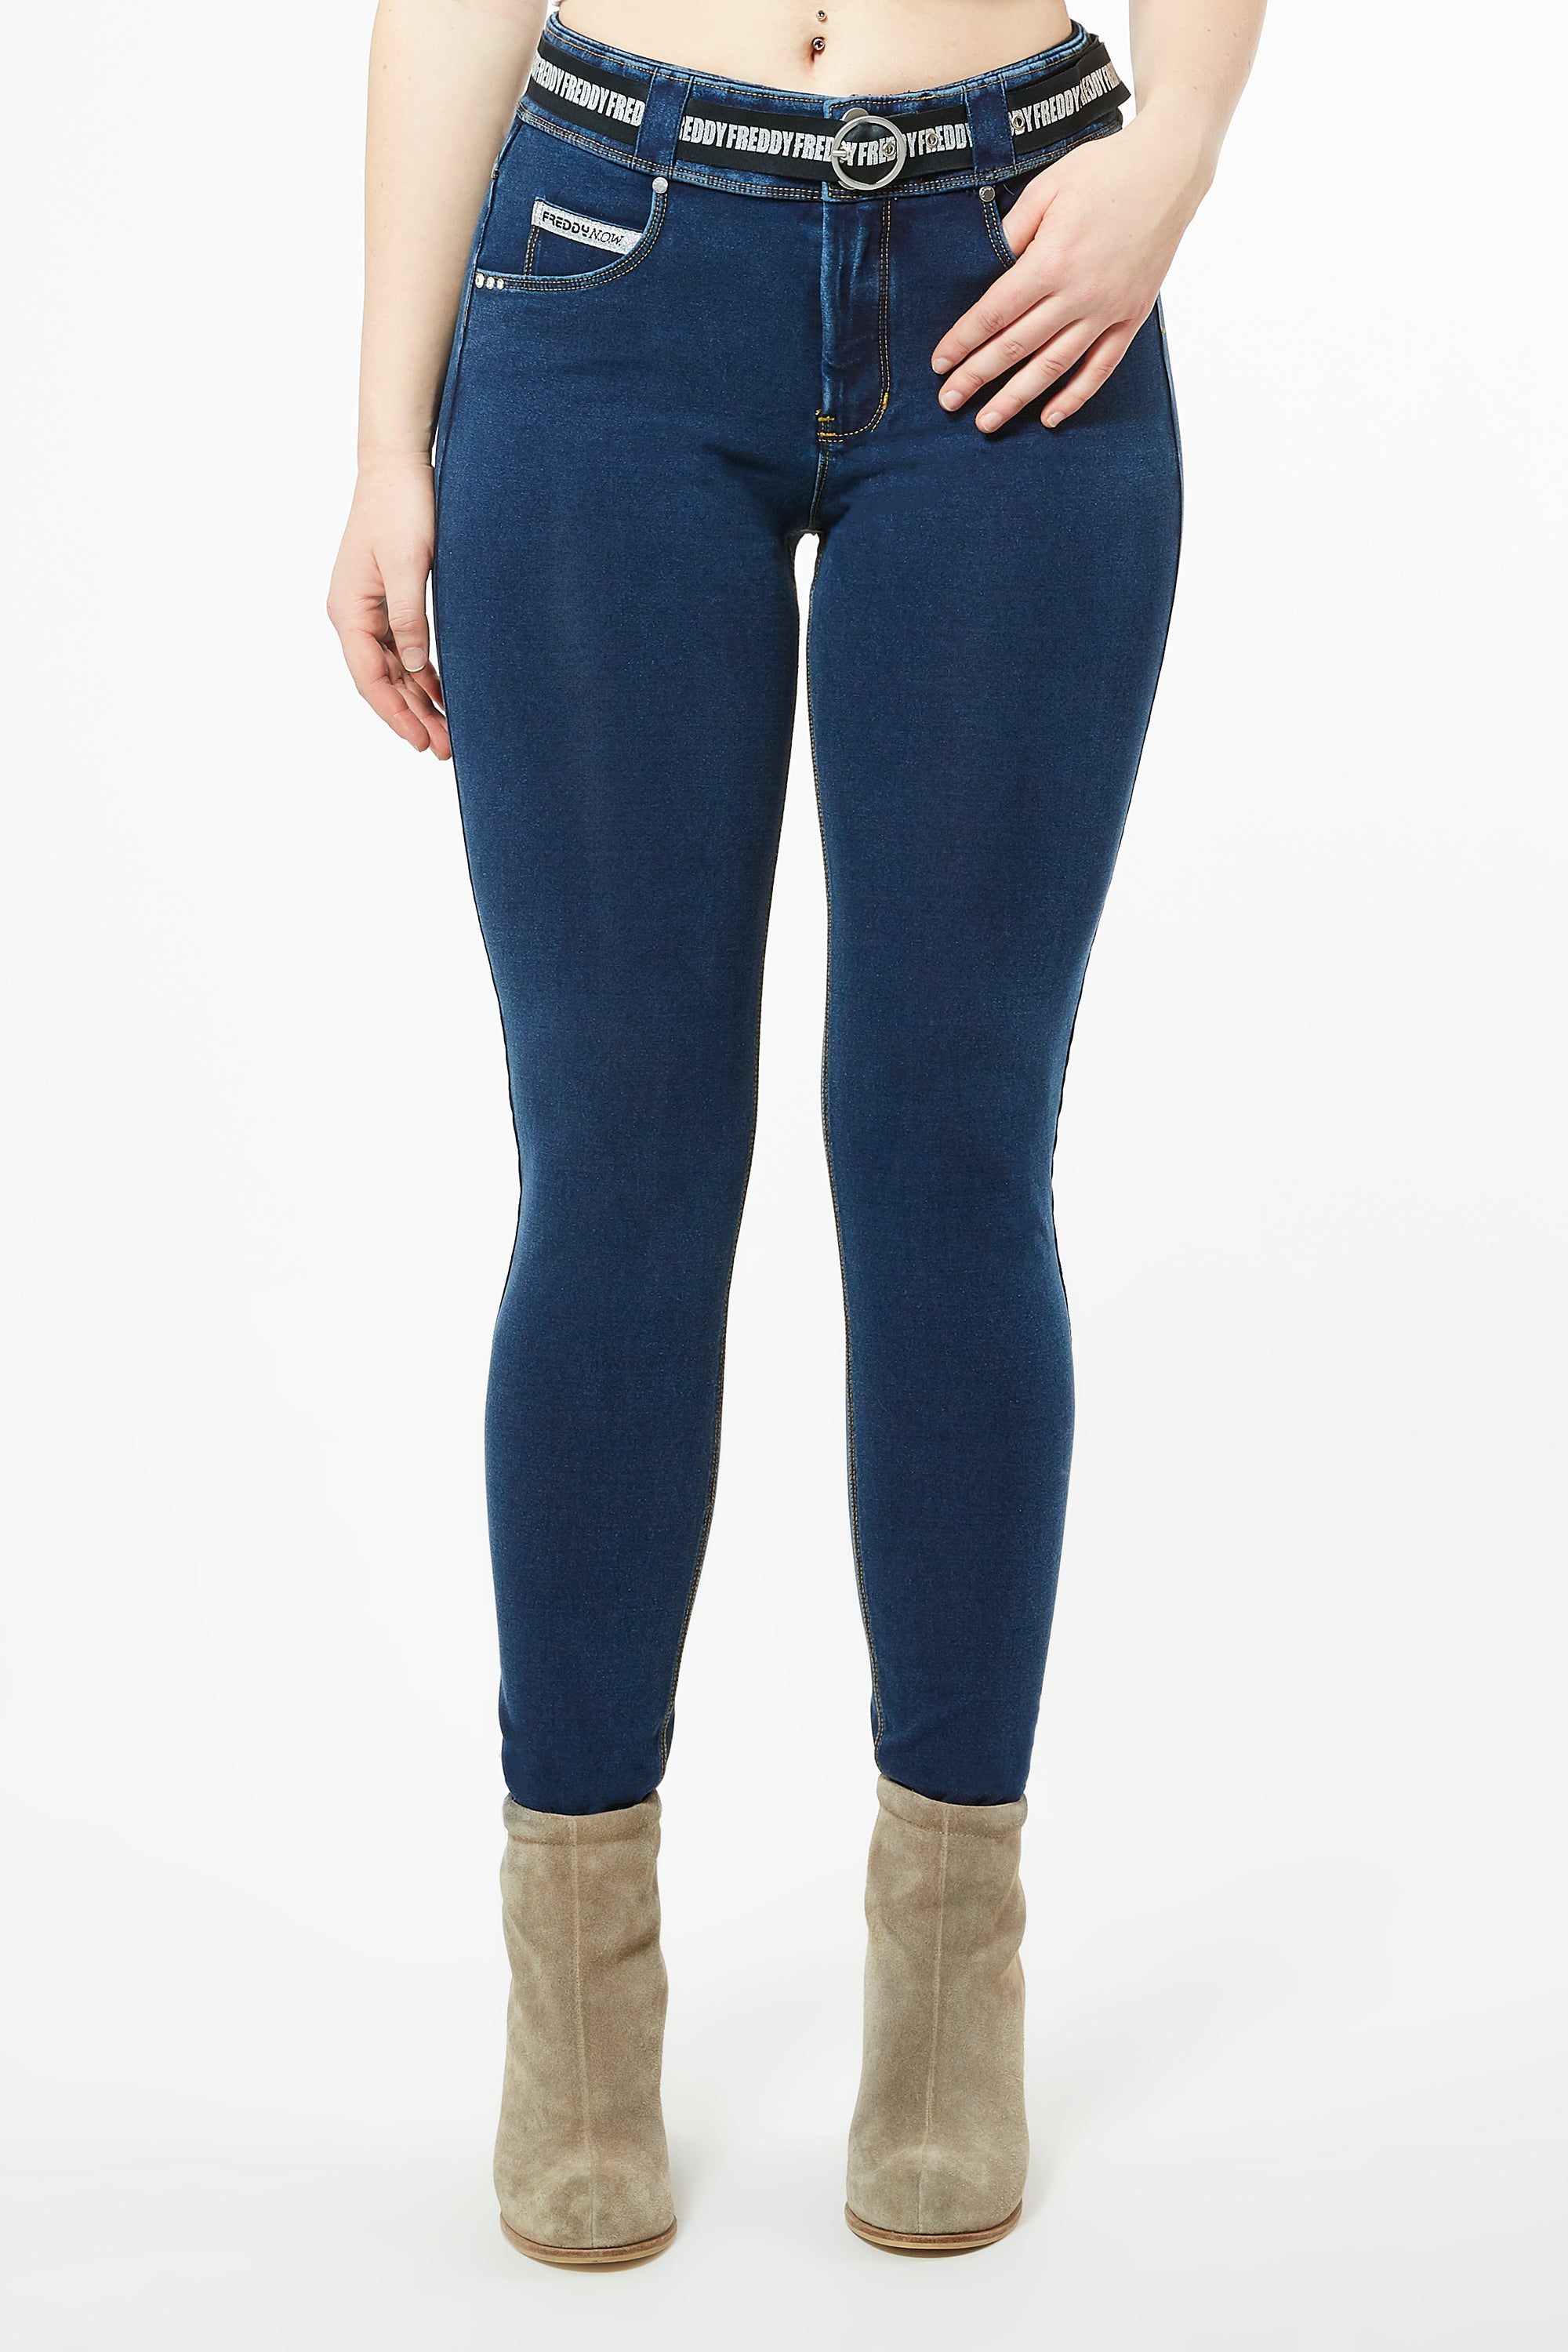 Women's High-Waisted Jeans - Shop Online Now